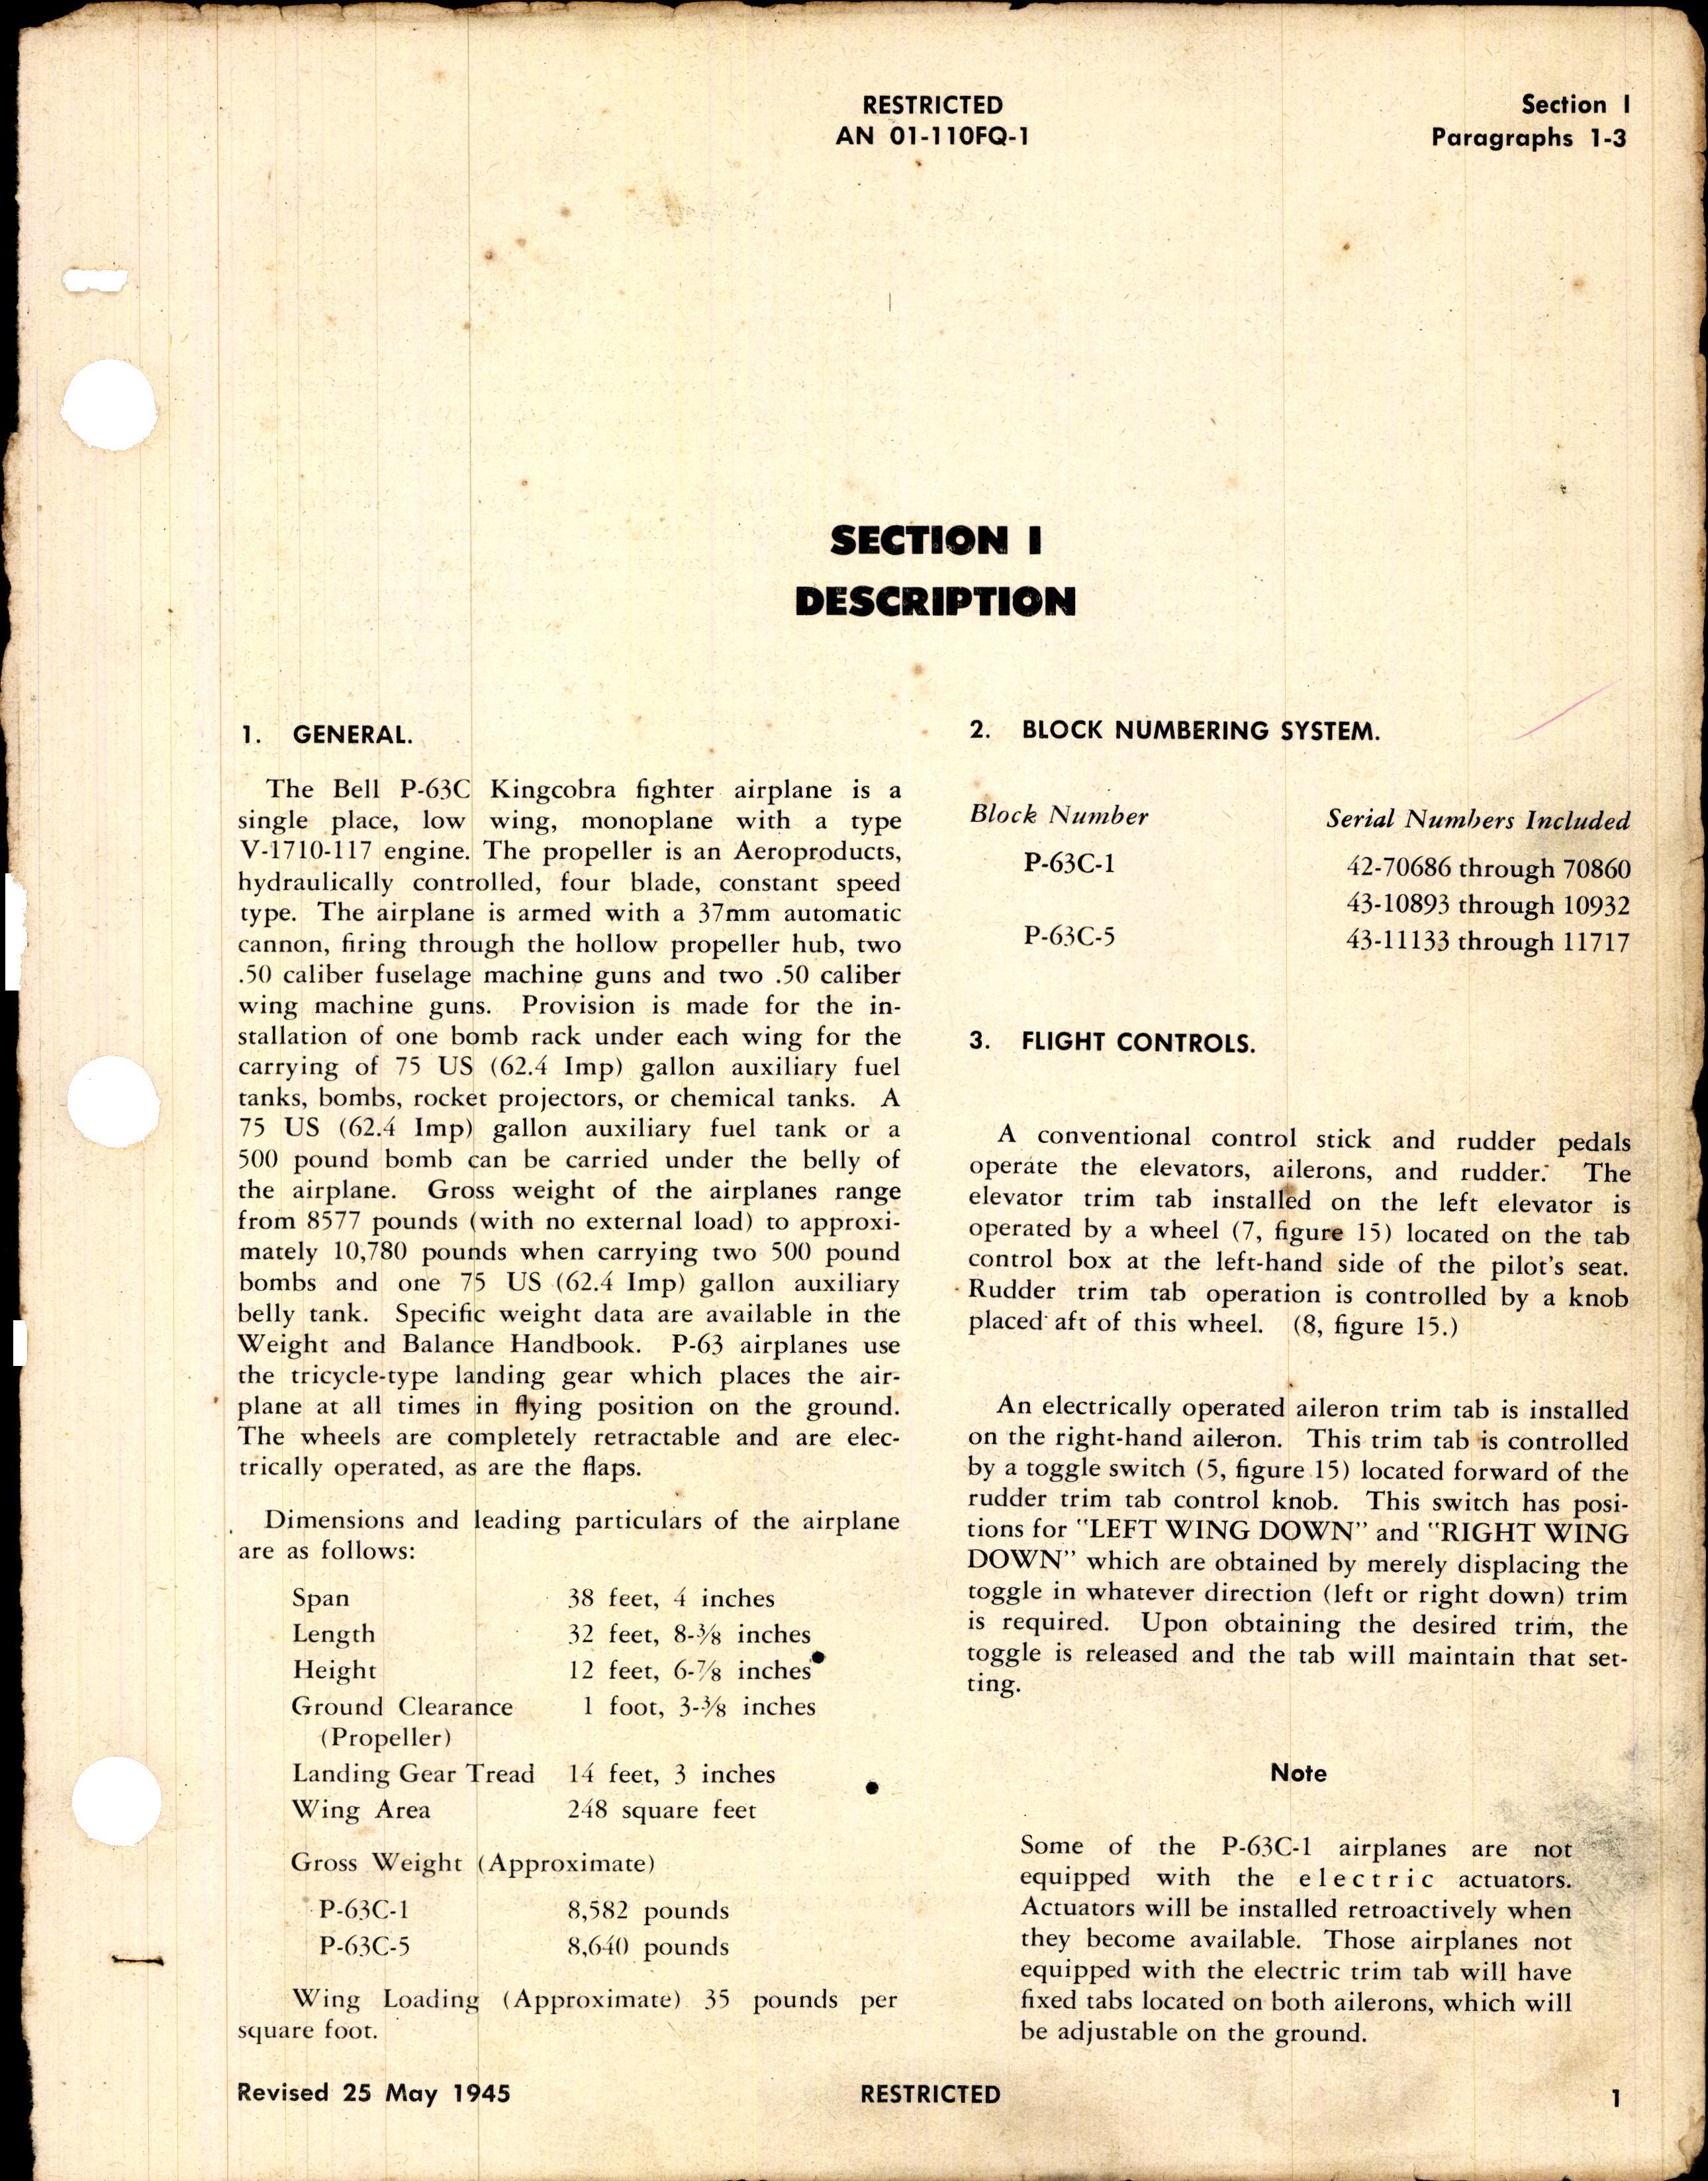 Sample page 5 from AirCorps Library document: Pilot's Flight Operating Instructions for P-63C Airplane